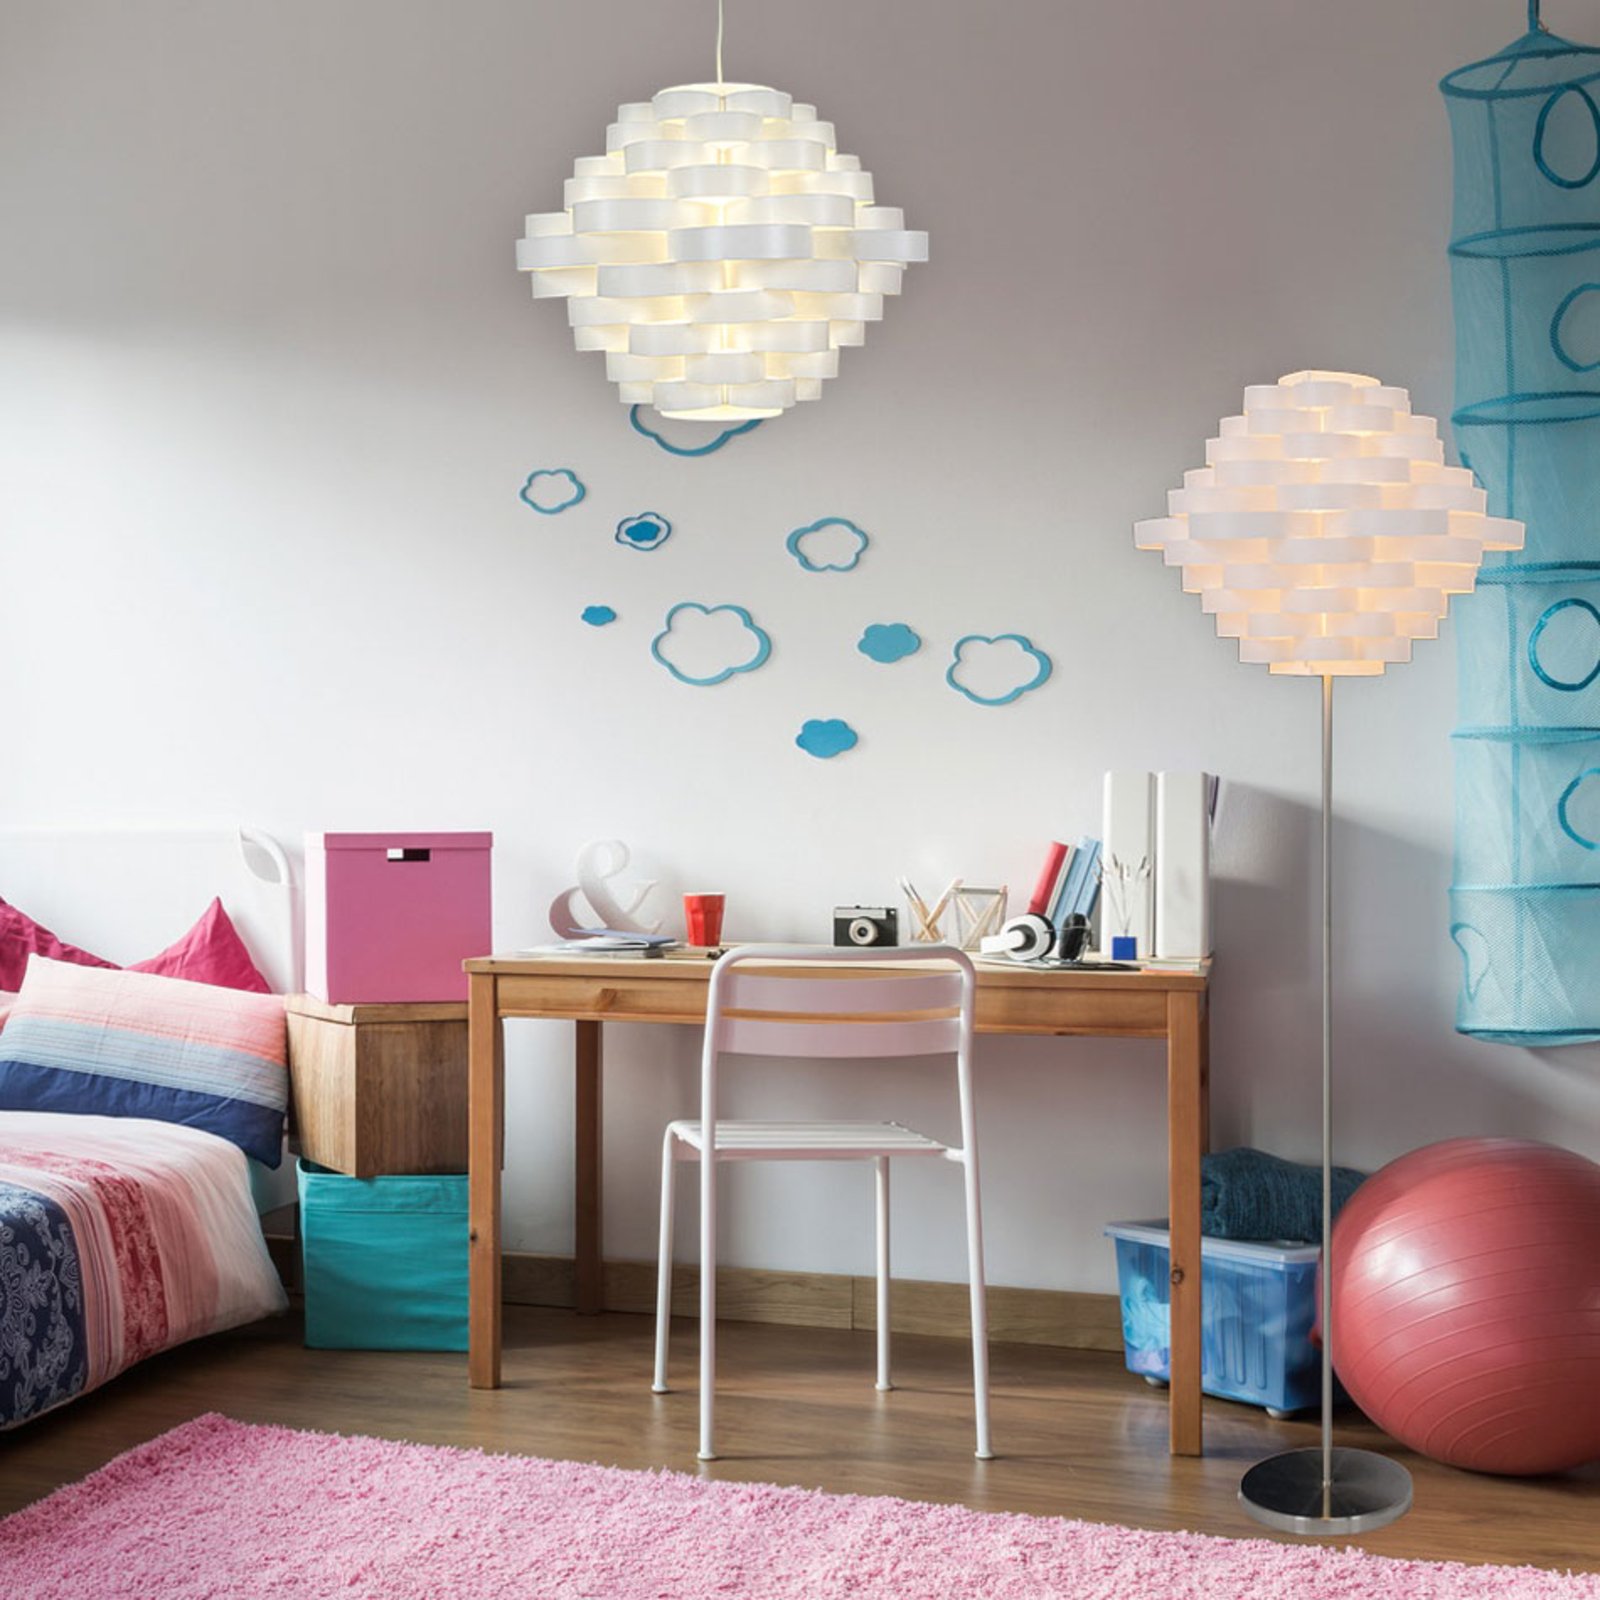 White floor lamp with lampshade of circular discs